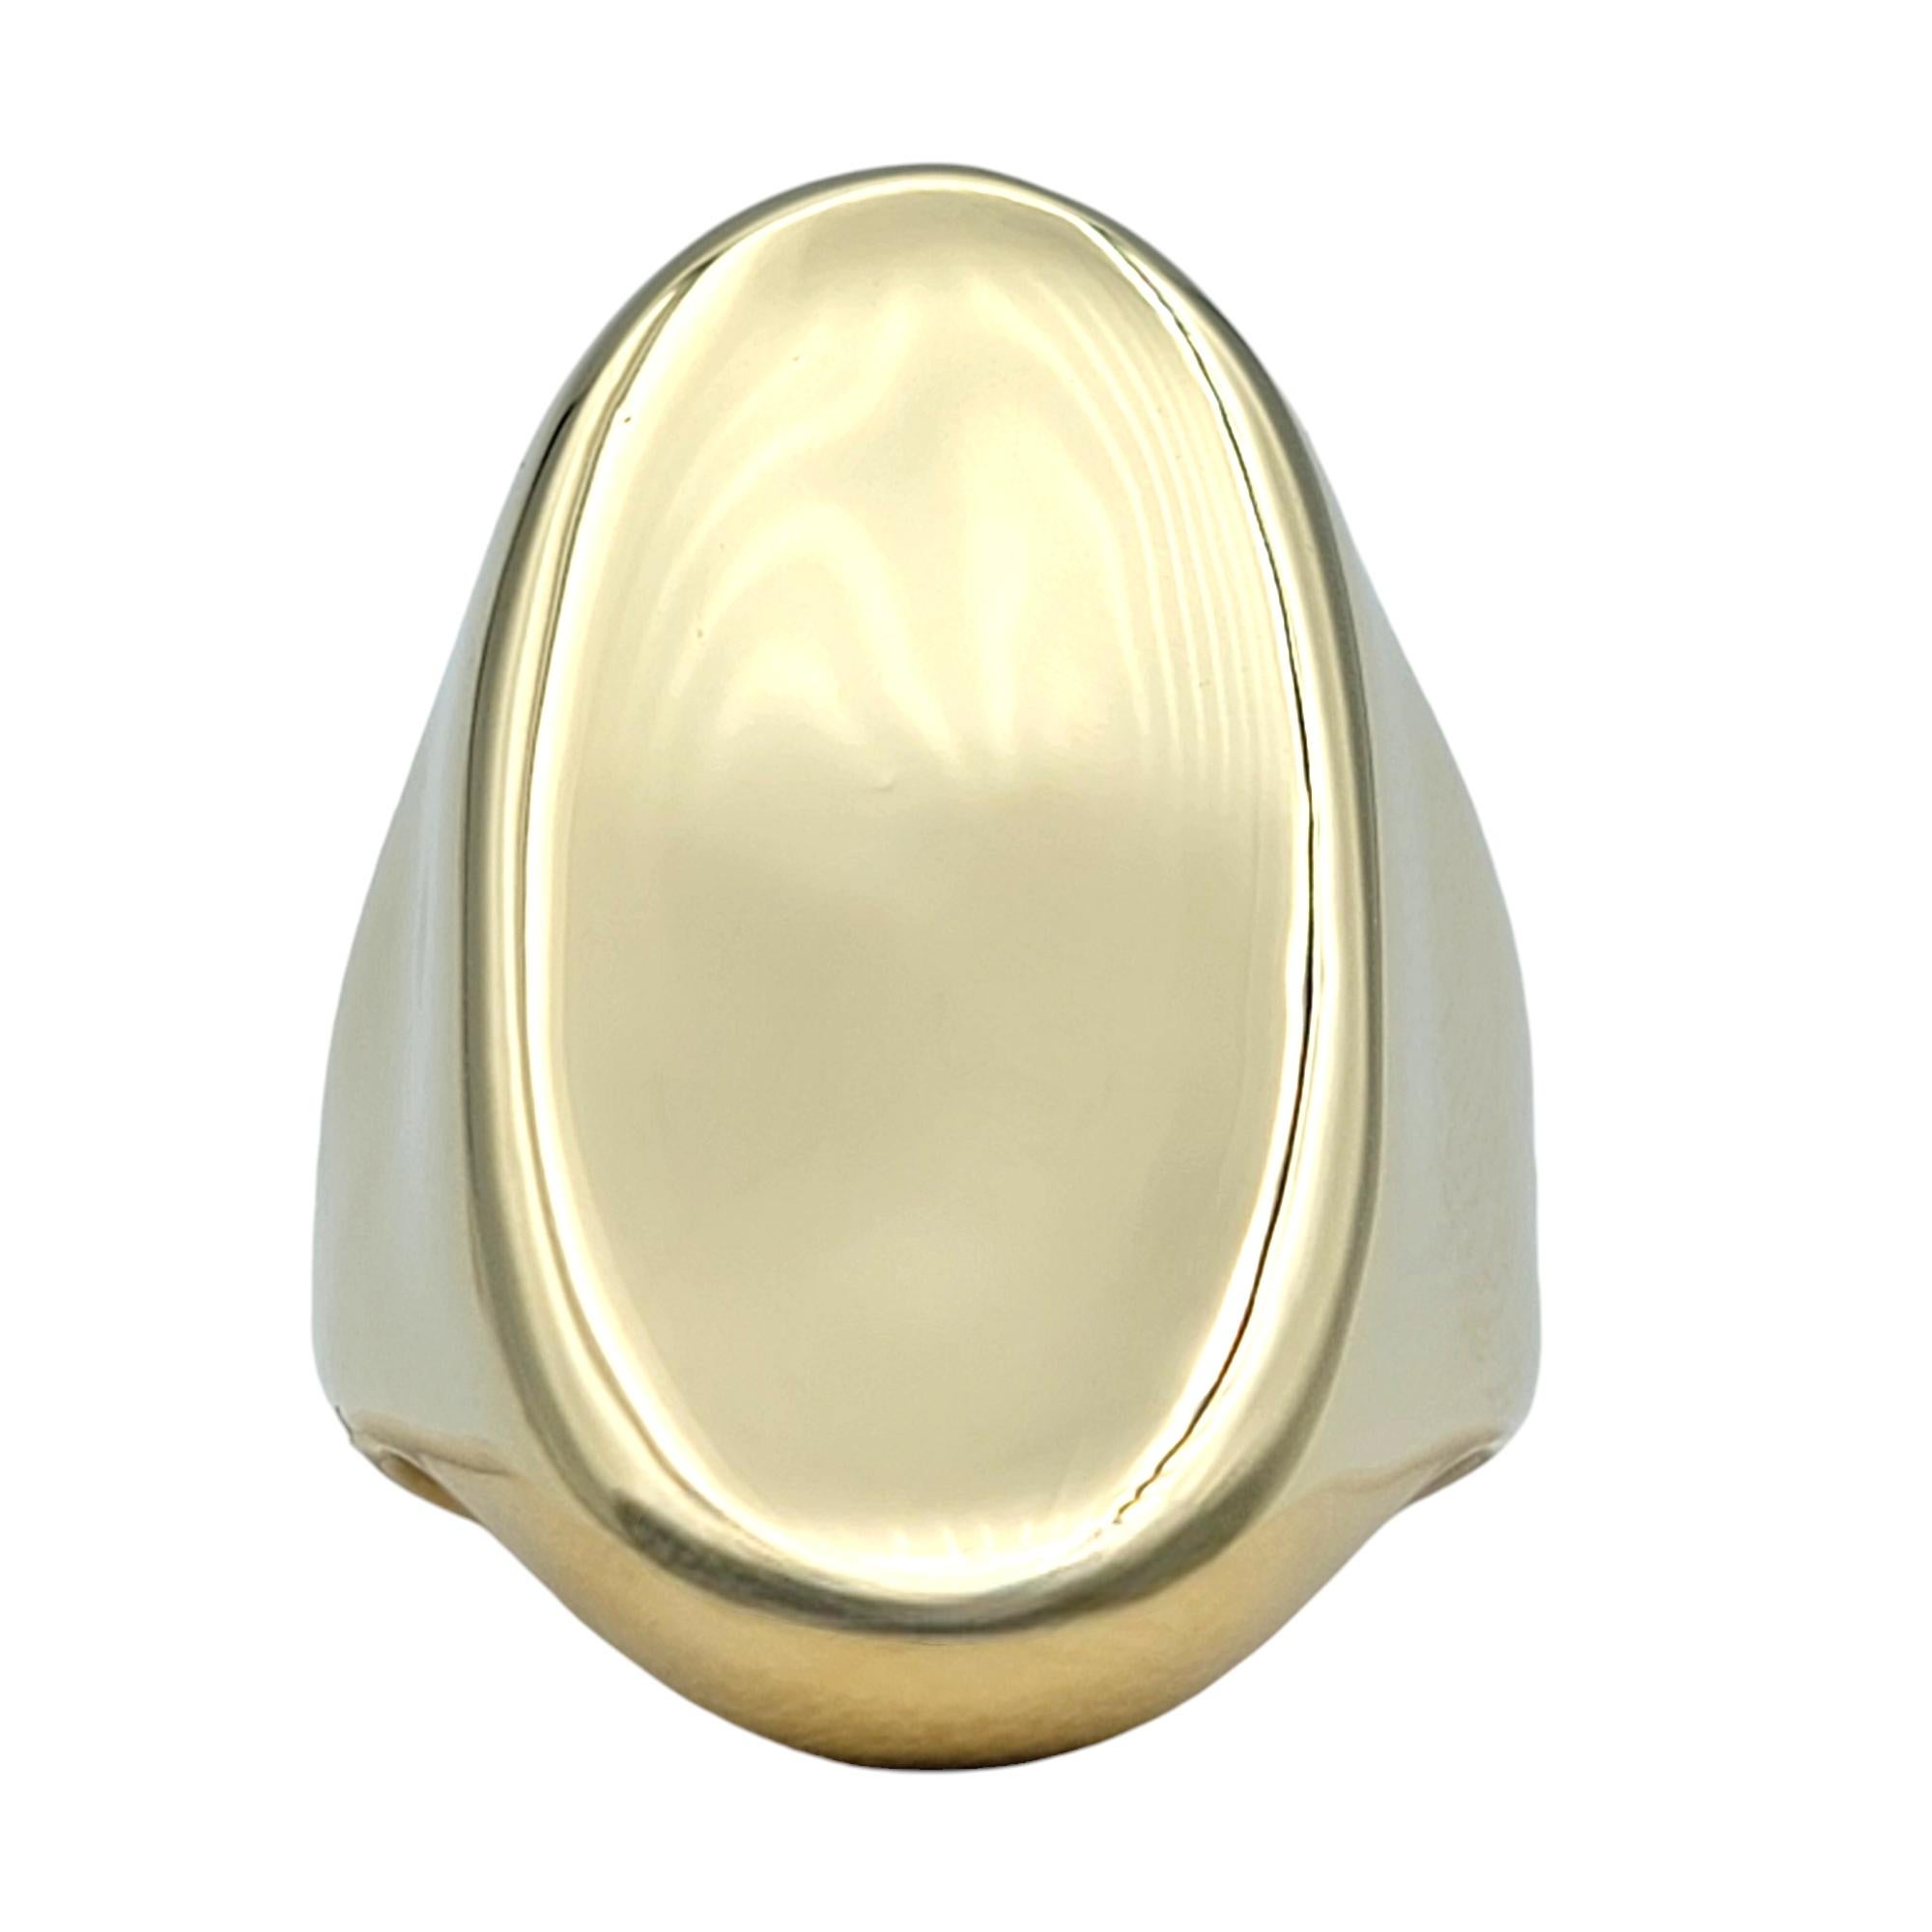 Ring Size: 6

This gorgeous Robert Lee Morris RLM Studio oval concave style ring exudes contemporary elegance with its sleek design and luxurious materials. Crafted from lustrous 14 karat yellow gold, this ring features an oval concave shape that